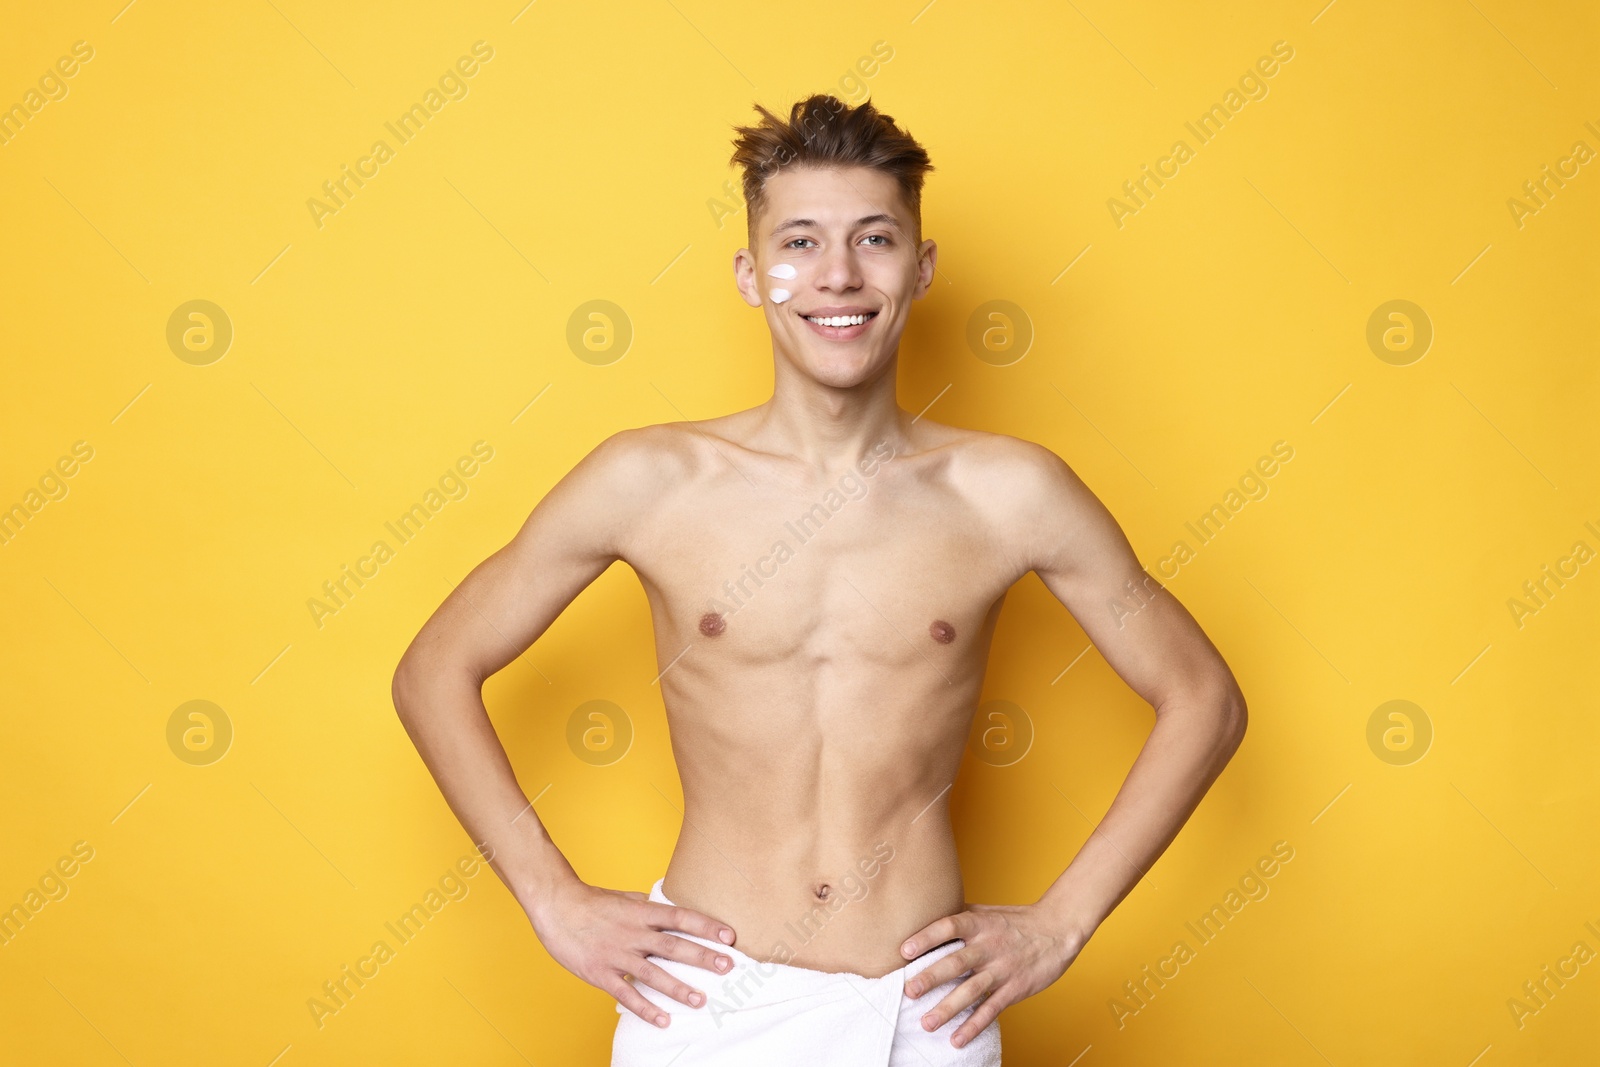 Photo of Handsome man with moisturizing cream on his face against orange background